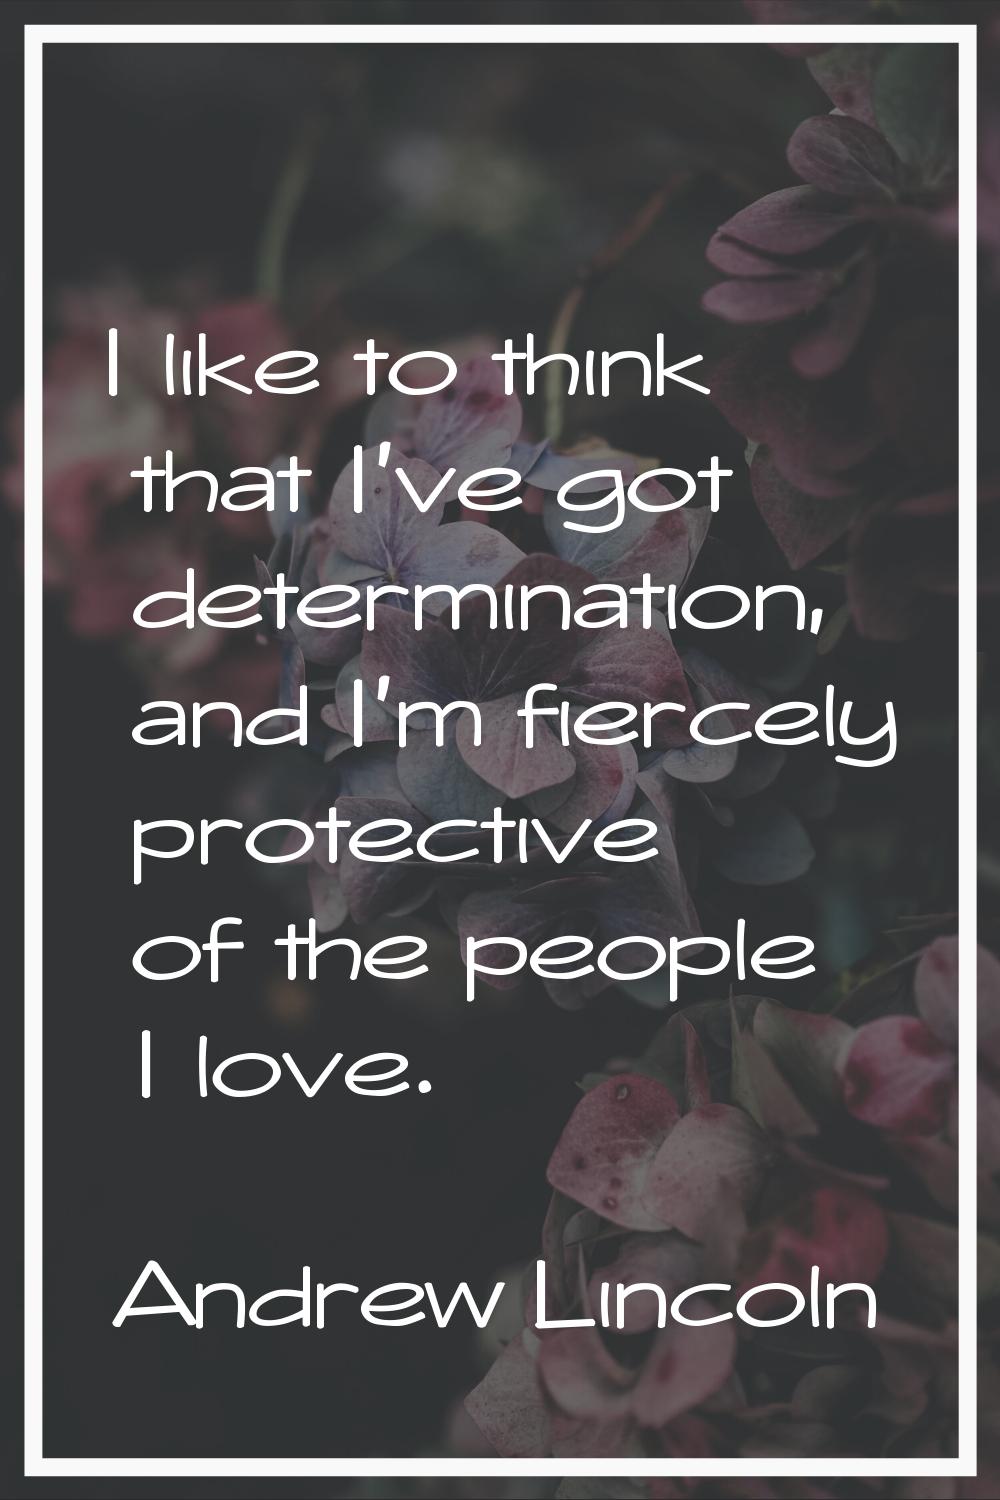 I like to think that I've got determination, and I'm fiercely protective of the people I love.